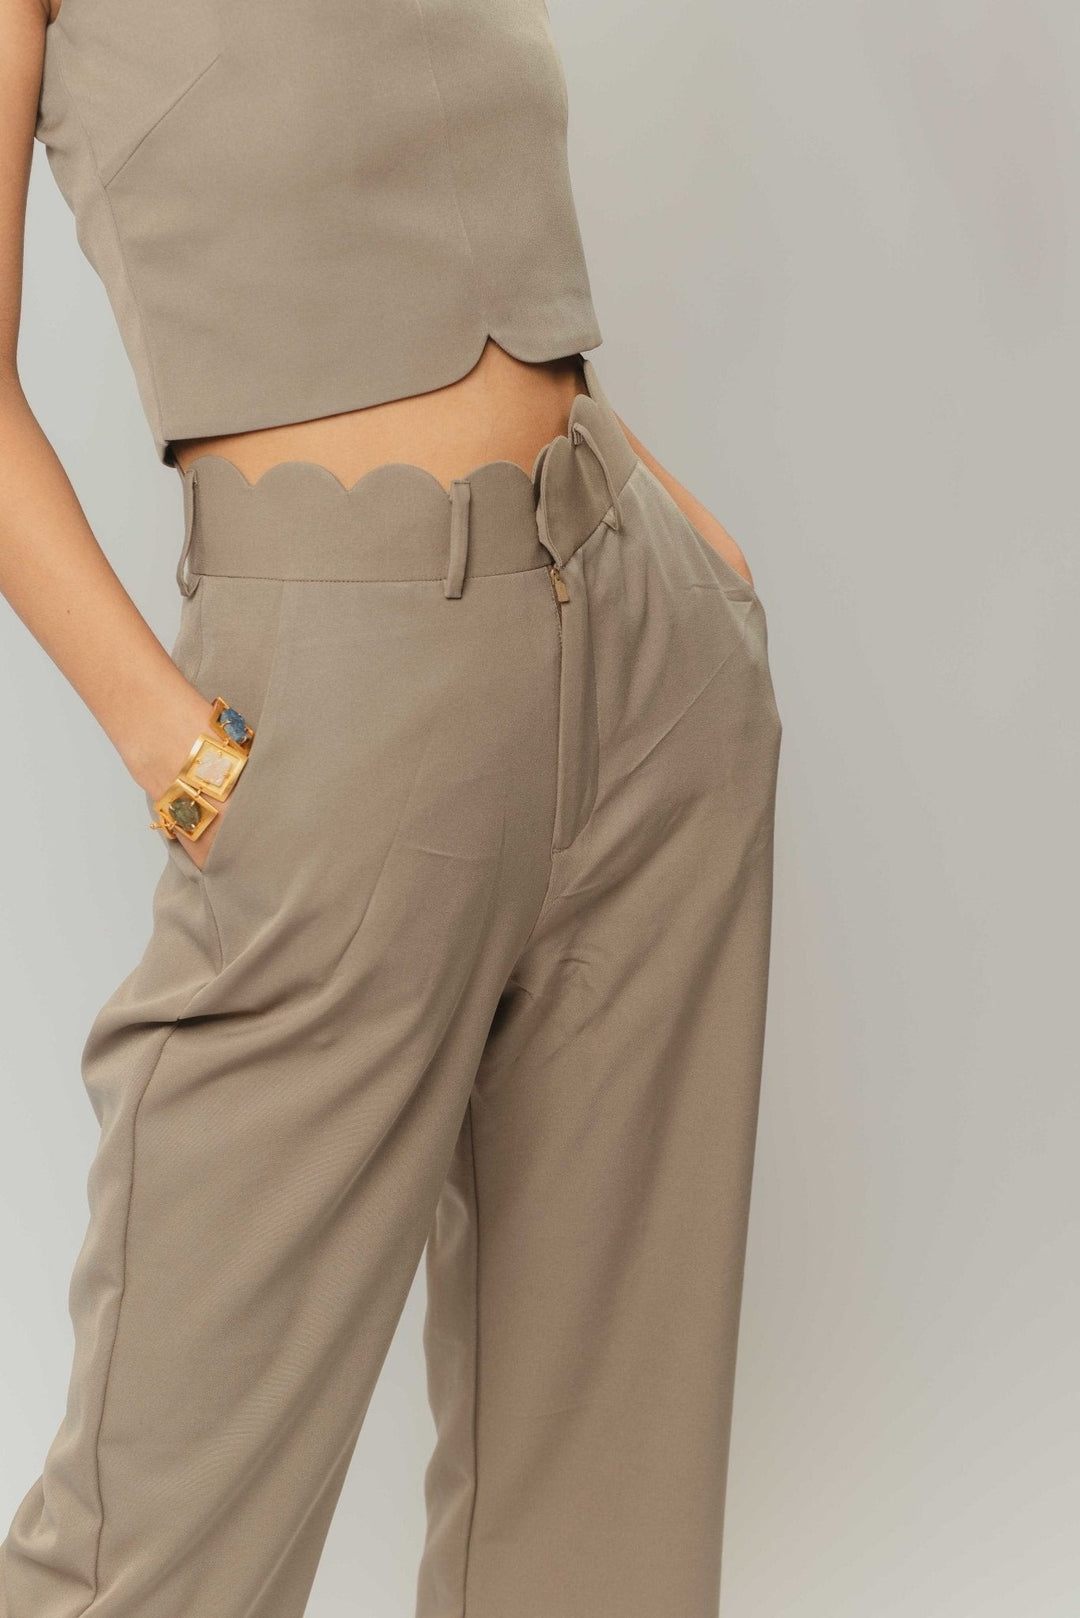 High waisted pants with hem variation crop top